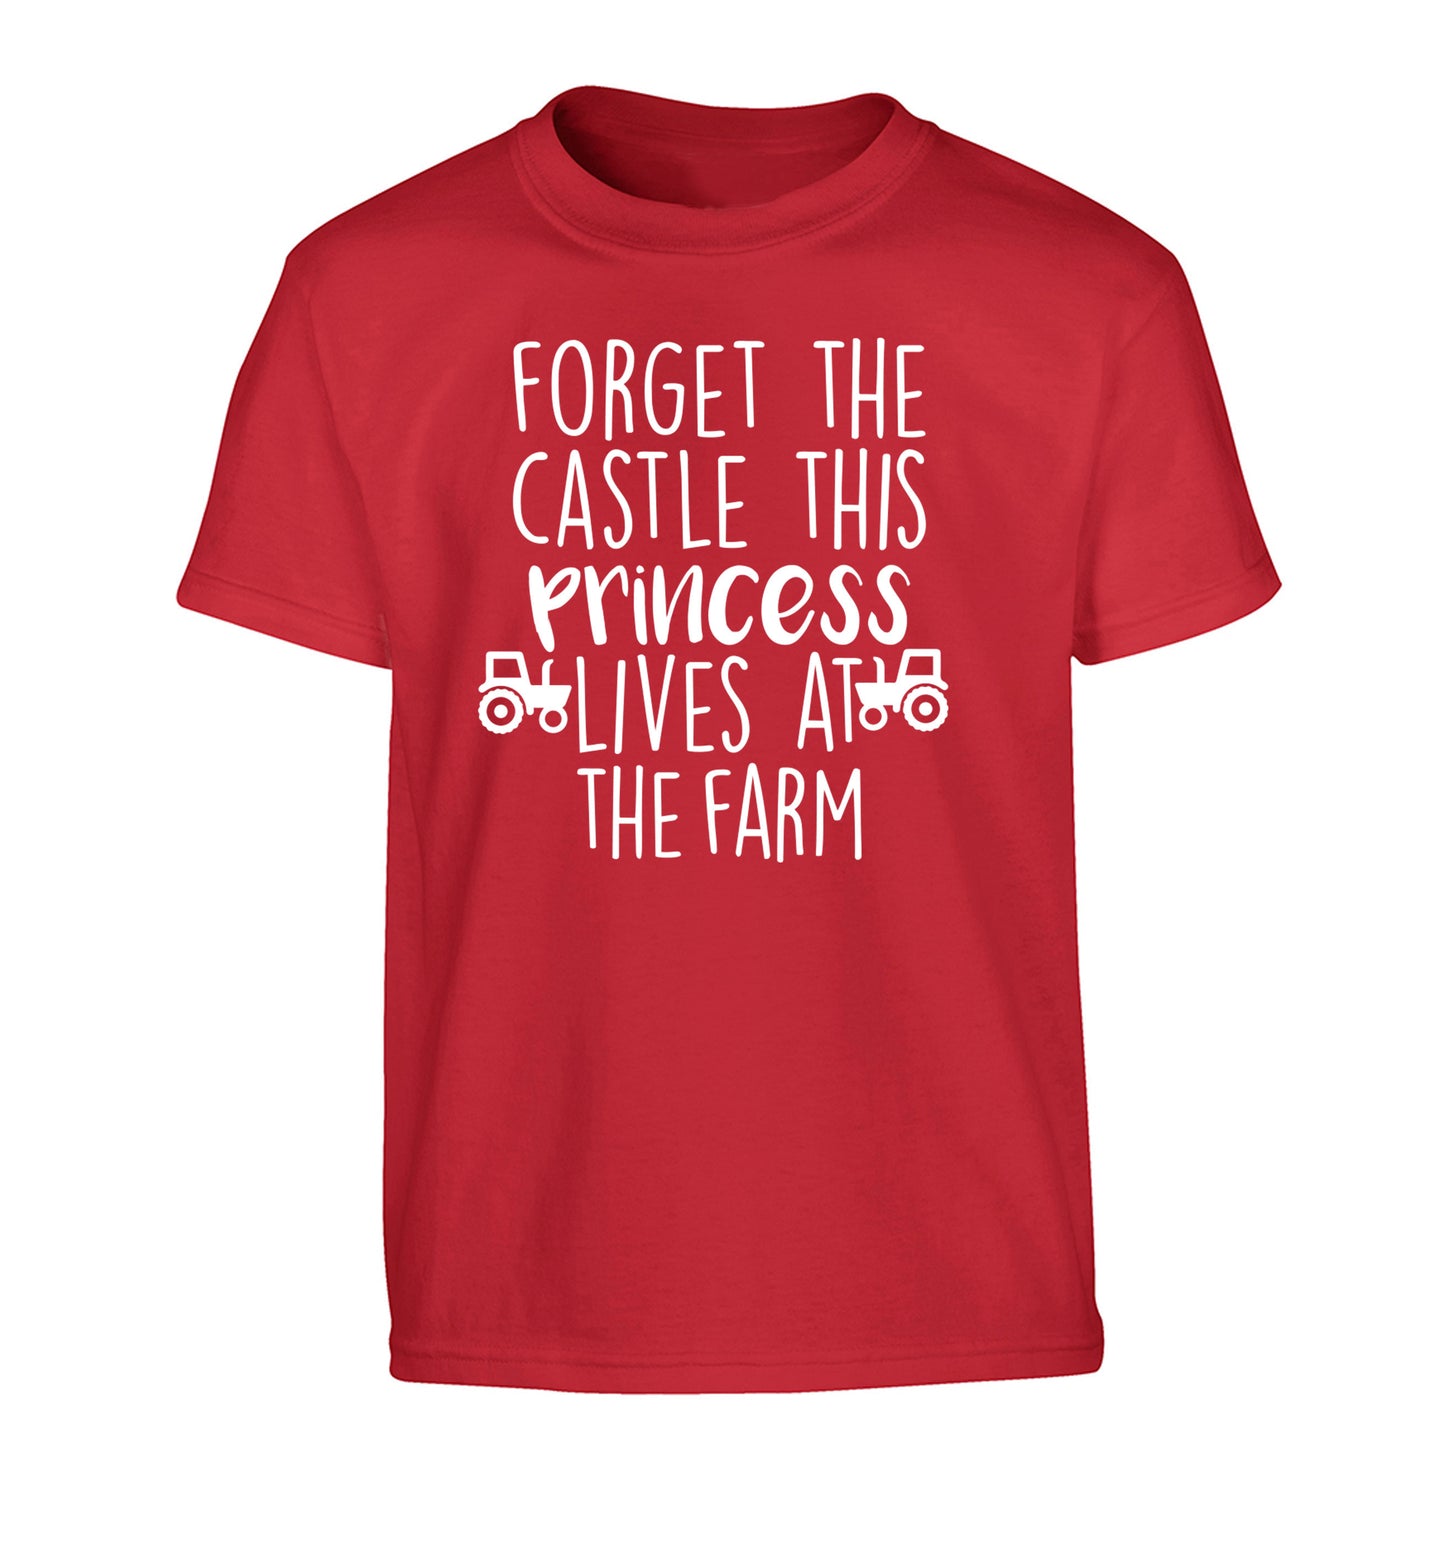 Forget the castle this princess lives at the farm Children's red Tshirt 12-14 Years